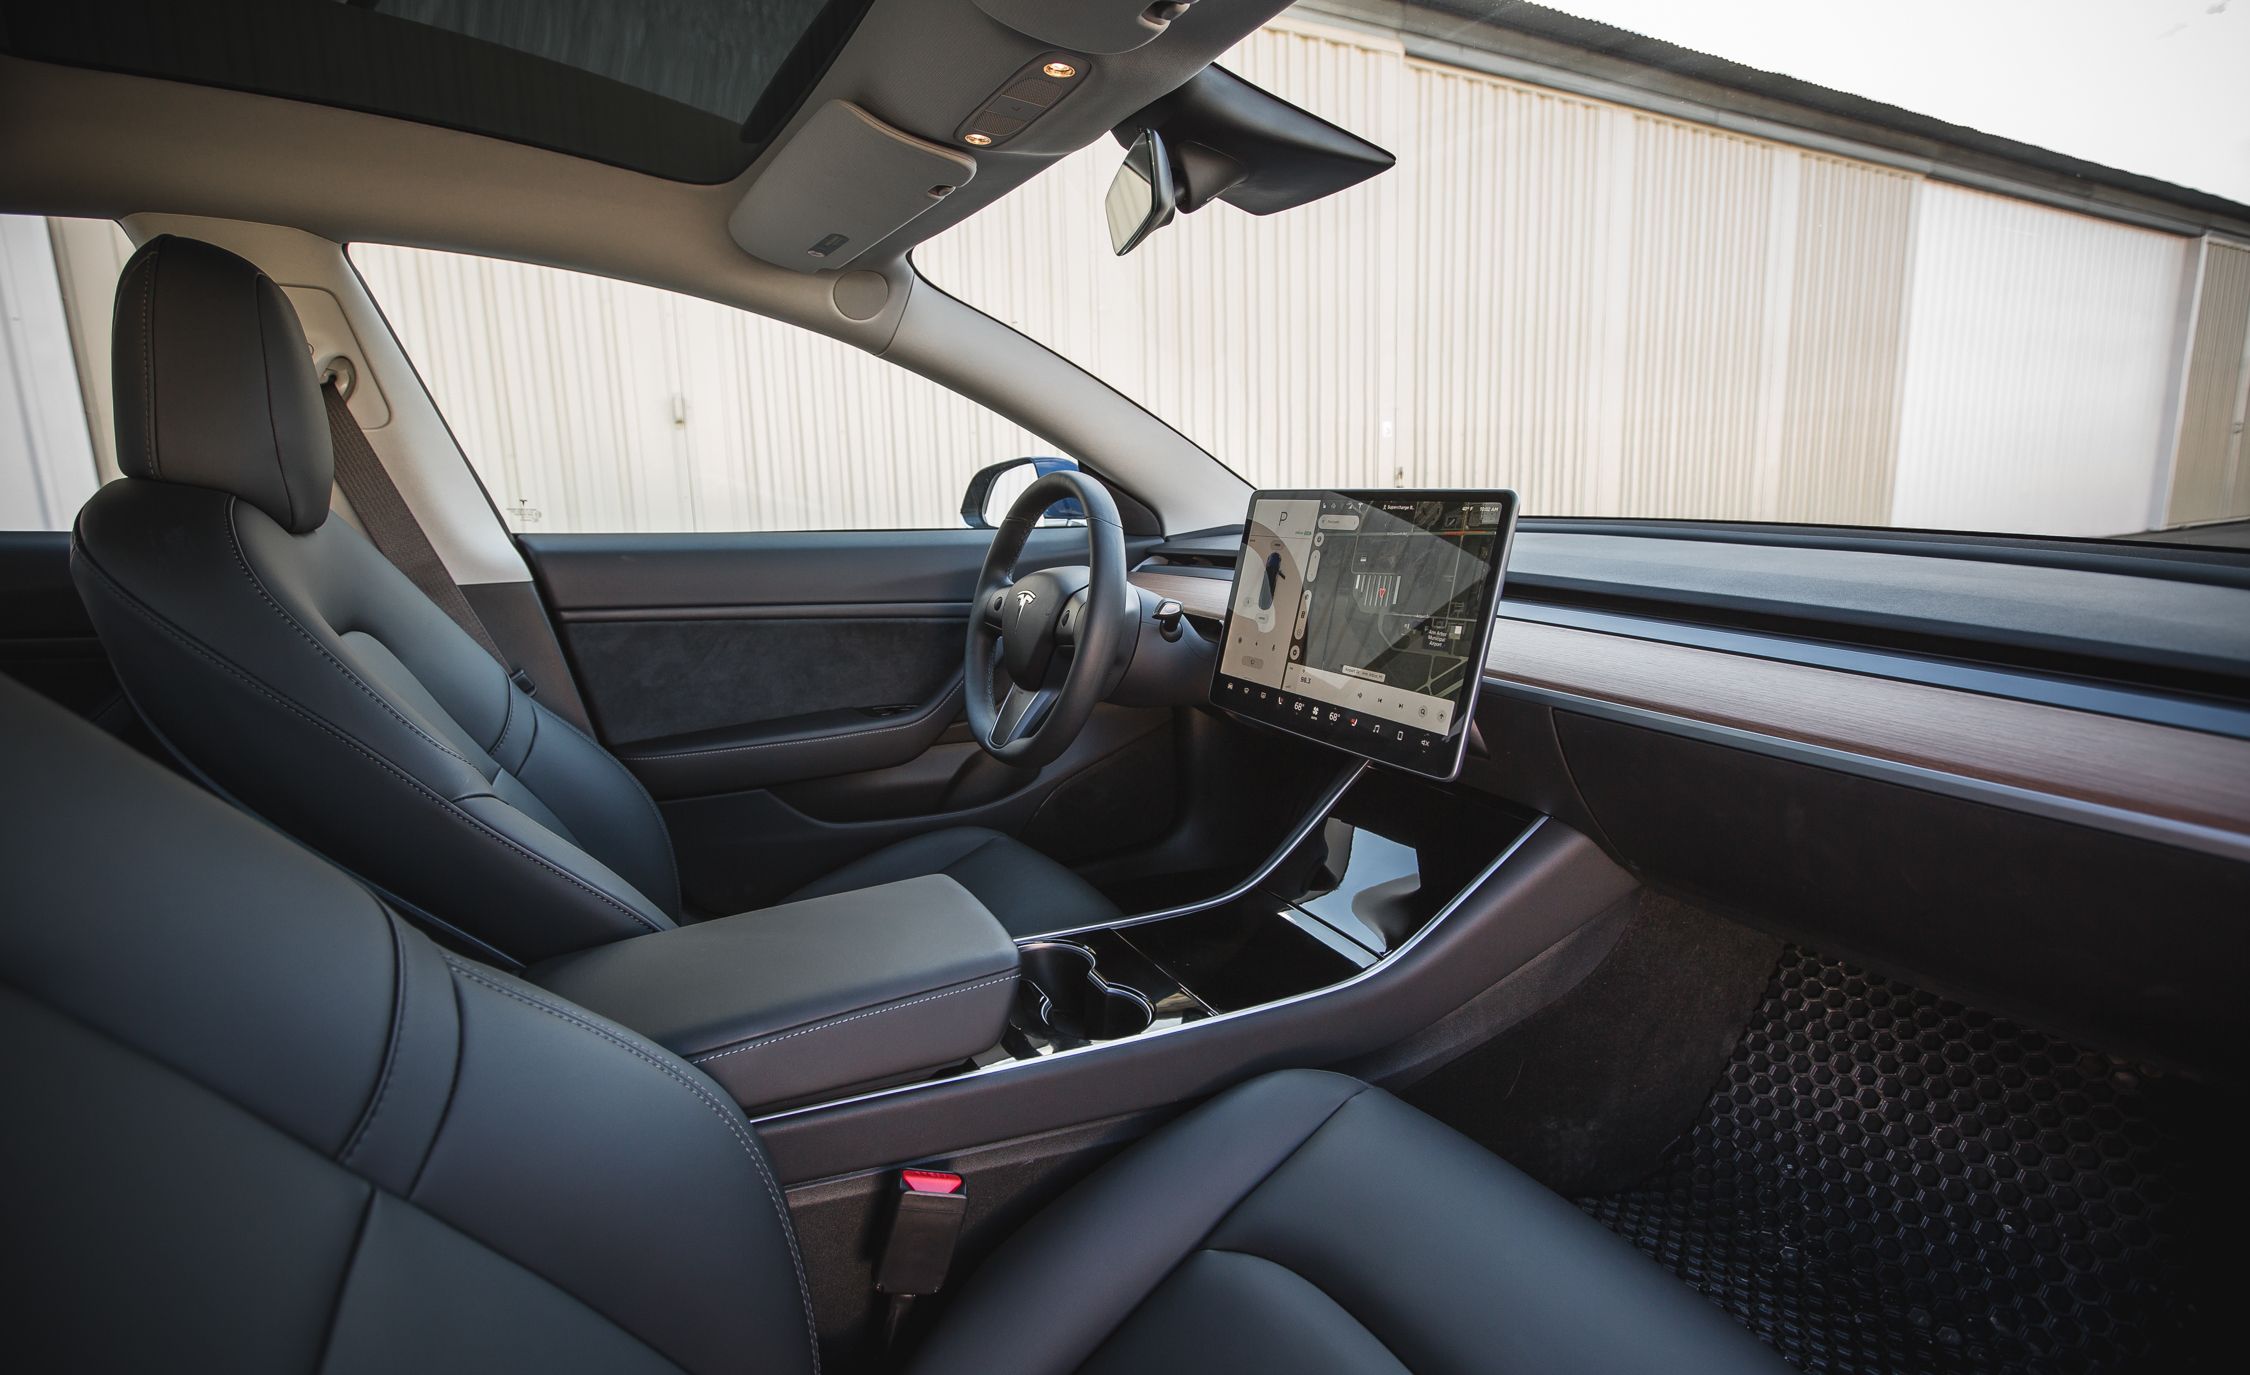 Tesla Moves to Fully Vegan, Leather-Free Interiors in Model 3 and